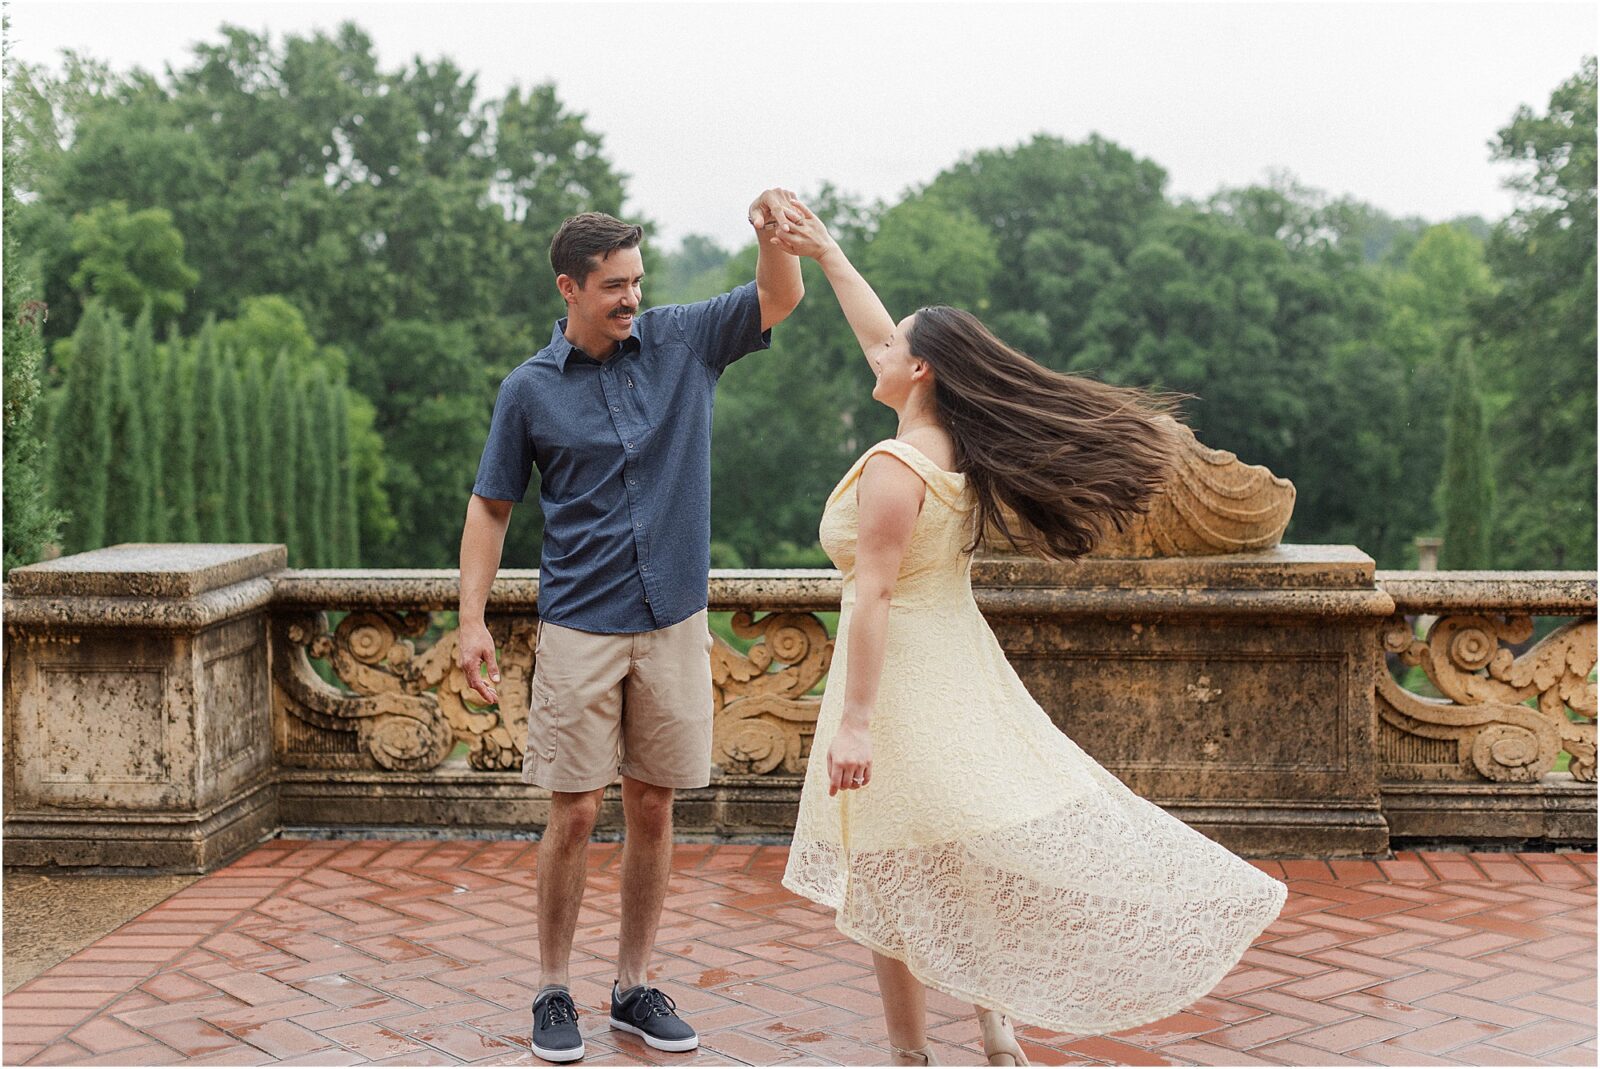 Bride and groom dancing on the balcony of the mansion during their rainy engagement session at the philbrook